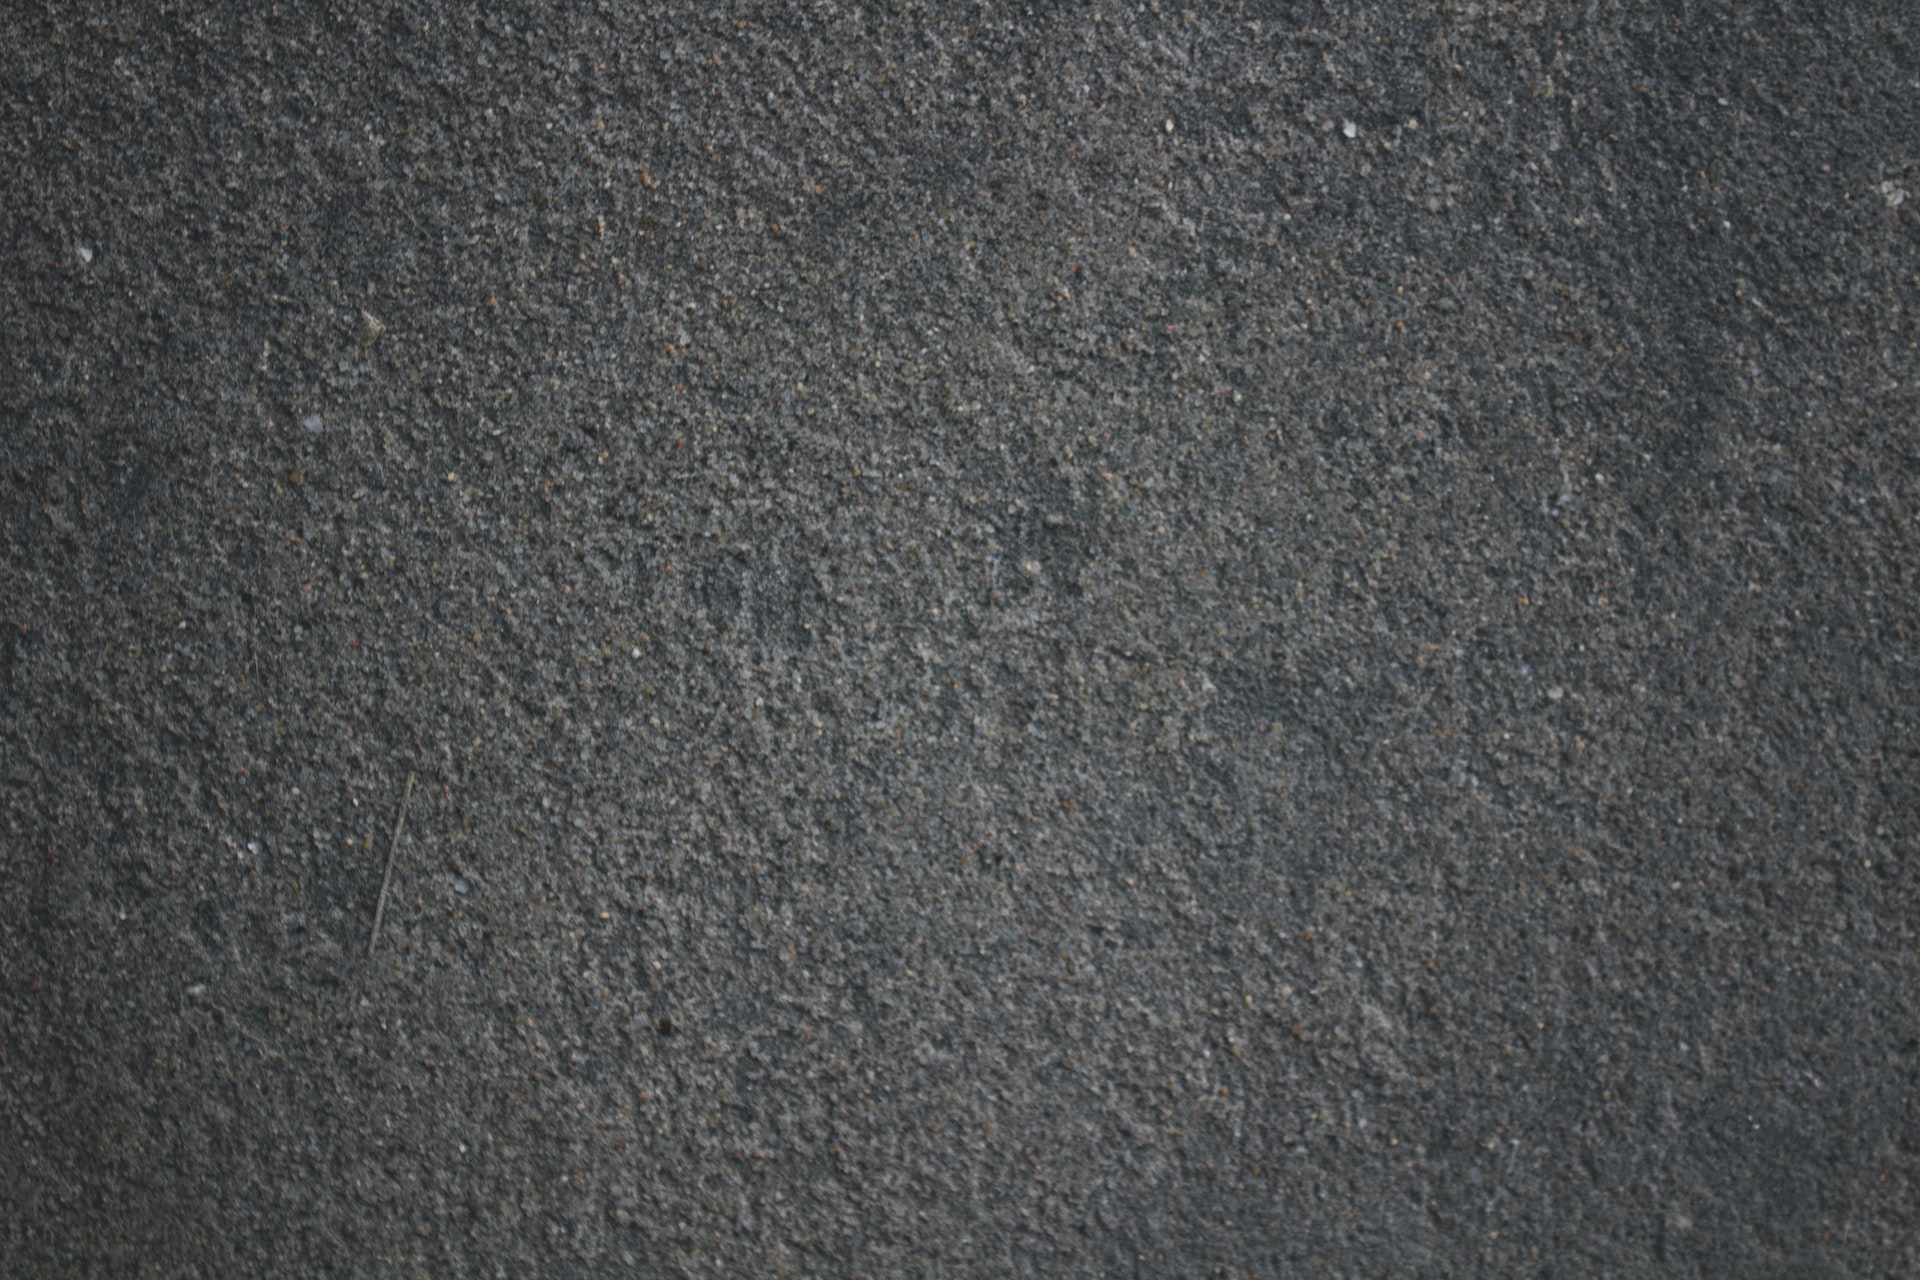 Common Uses of Commercial Asphalt Services